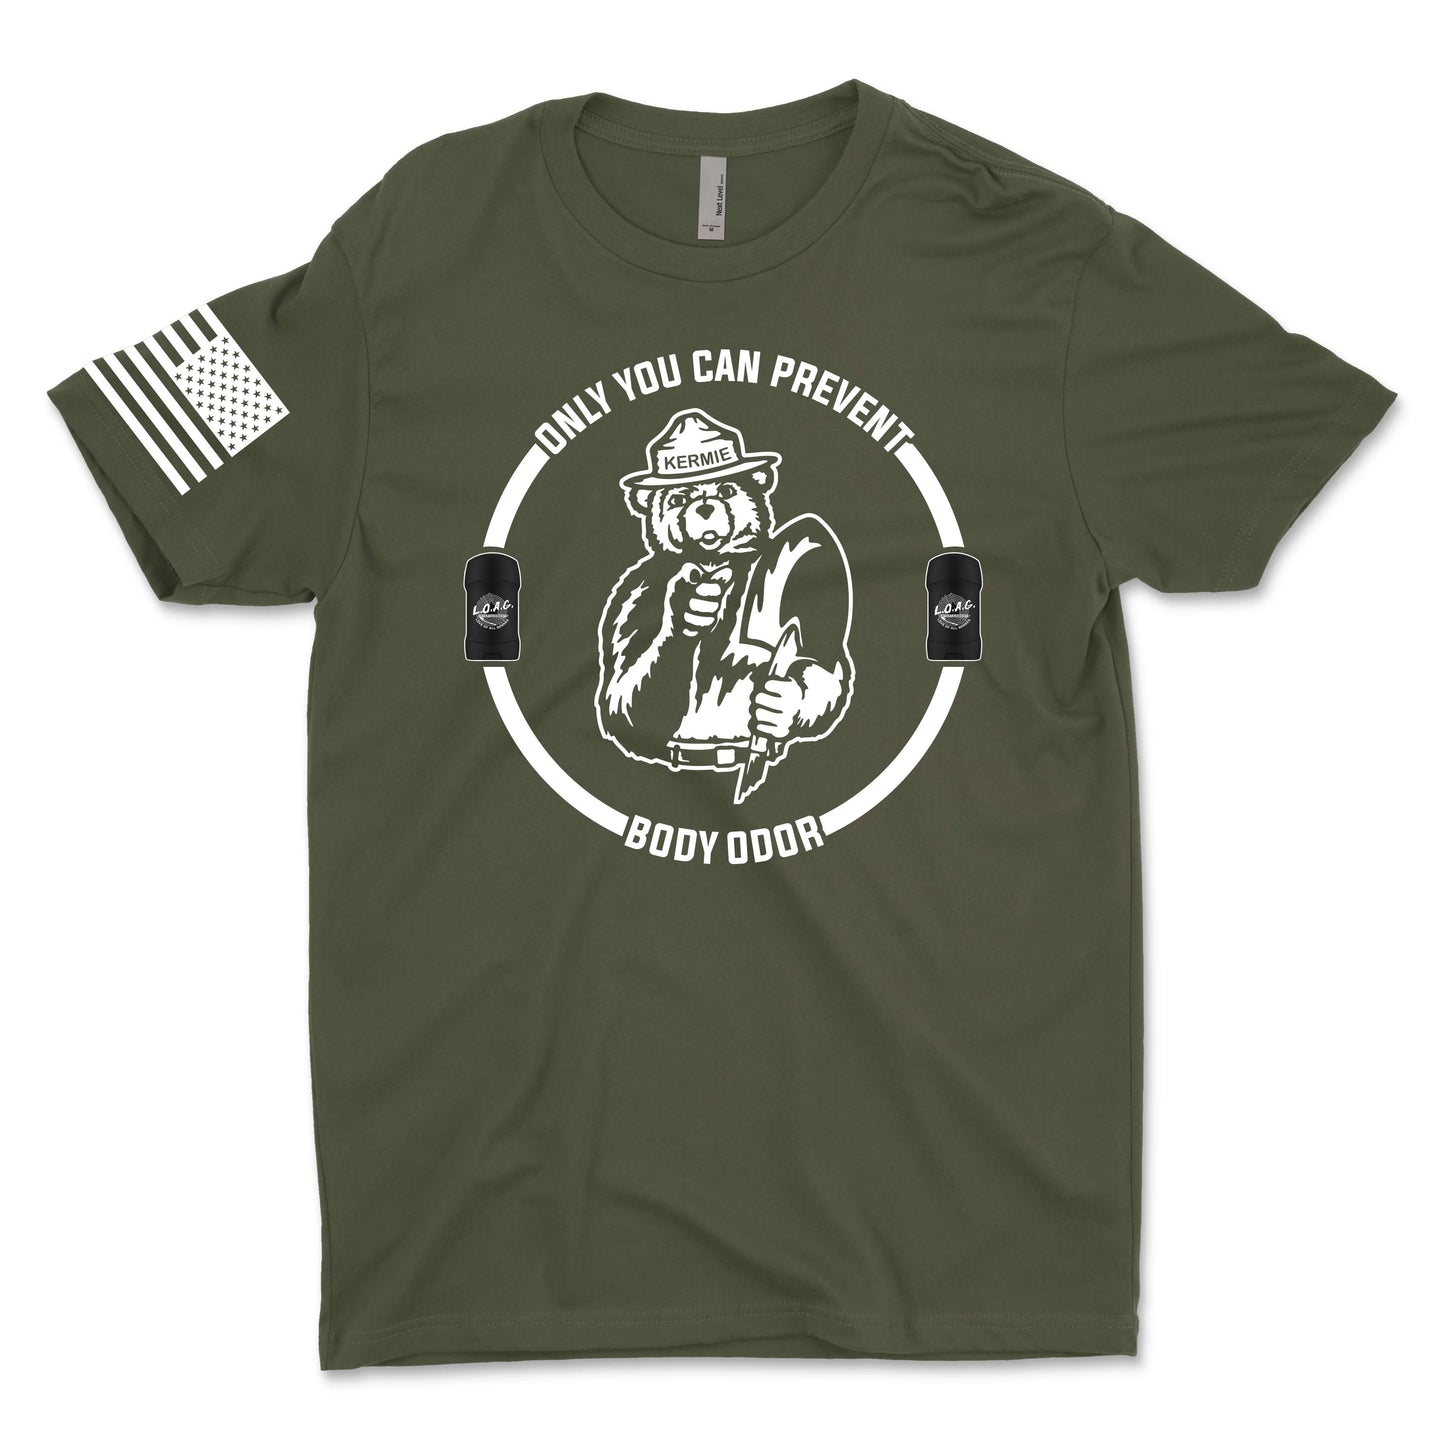 Only You Can Prevent Body Odor Men's T-Shirt